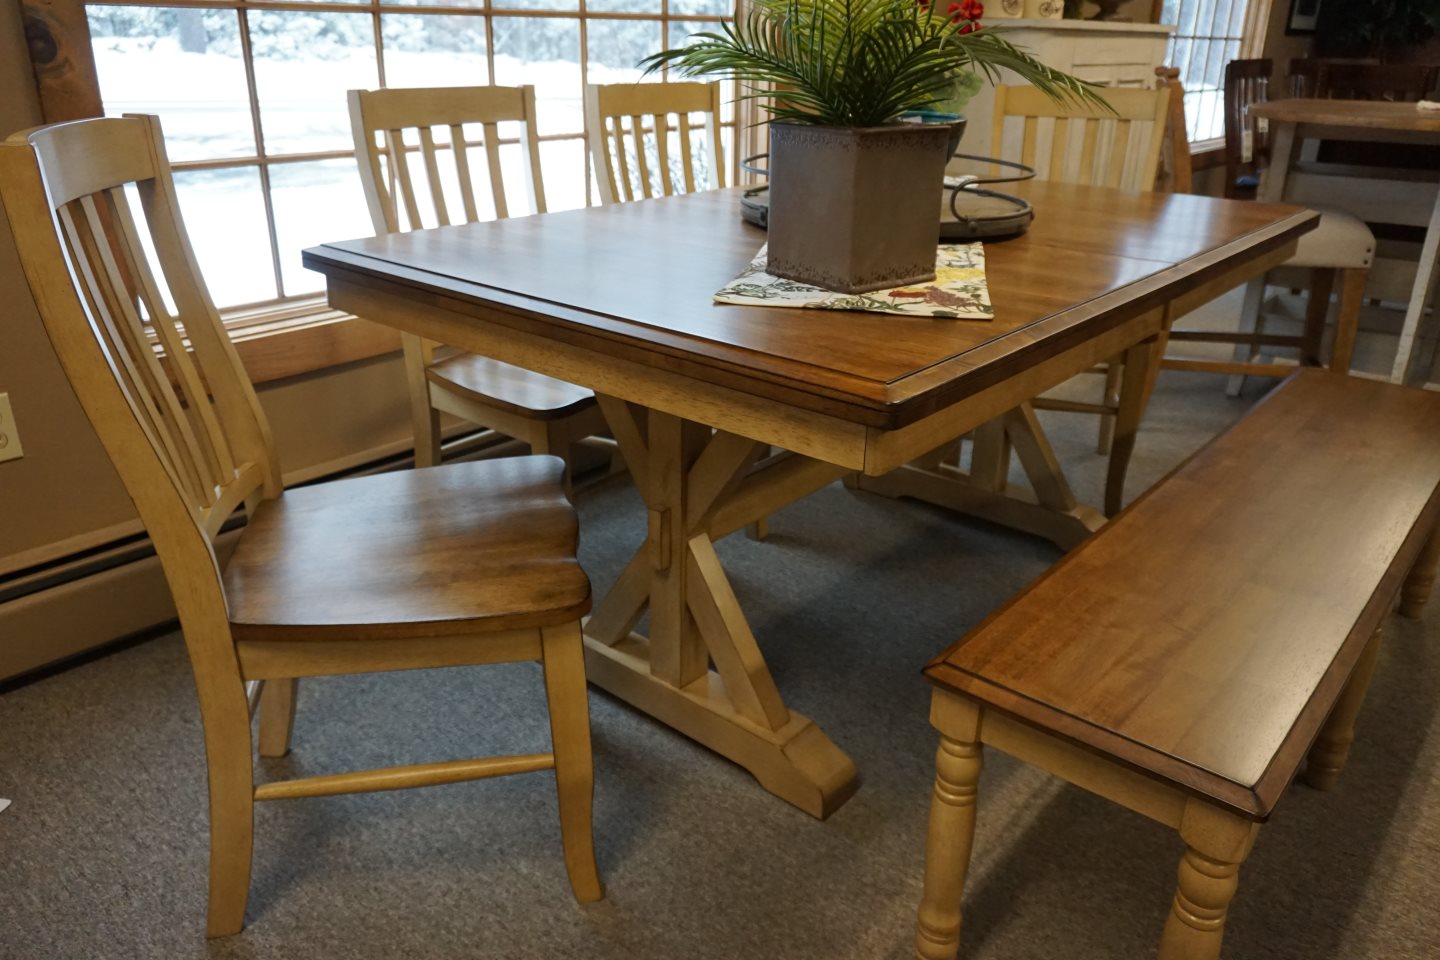 Winners Only - Quails Run Collection - X-Brace Trestle Table